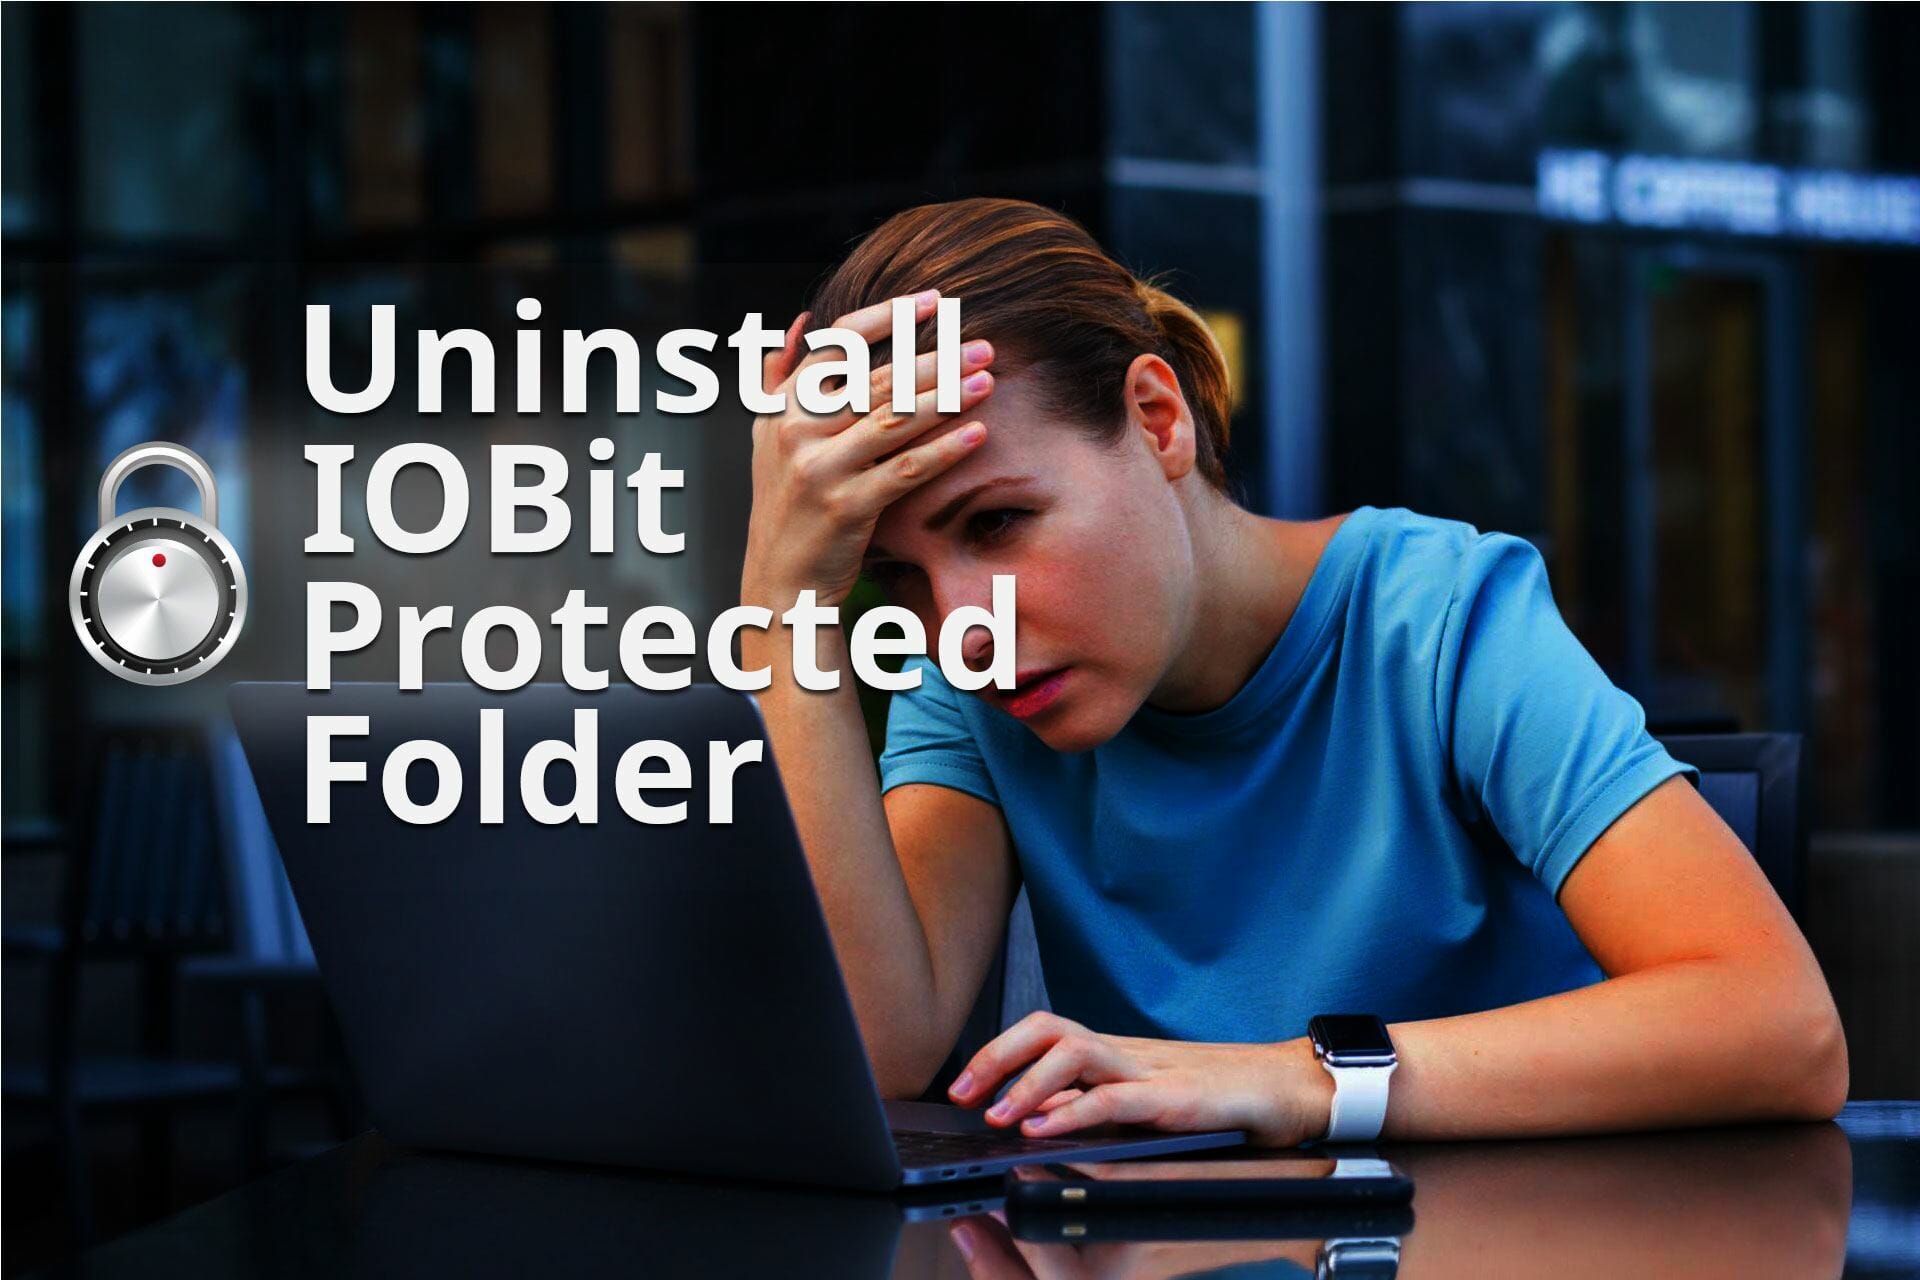 how to uninstall iobit protected folder without a password